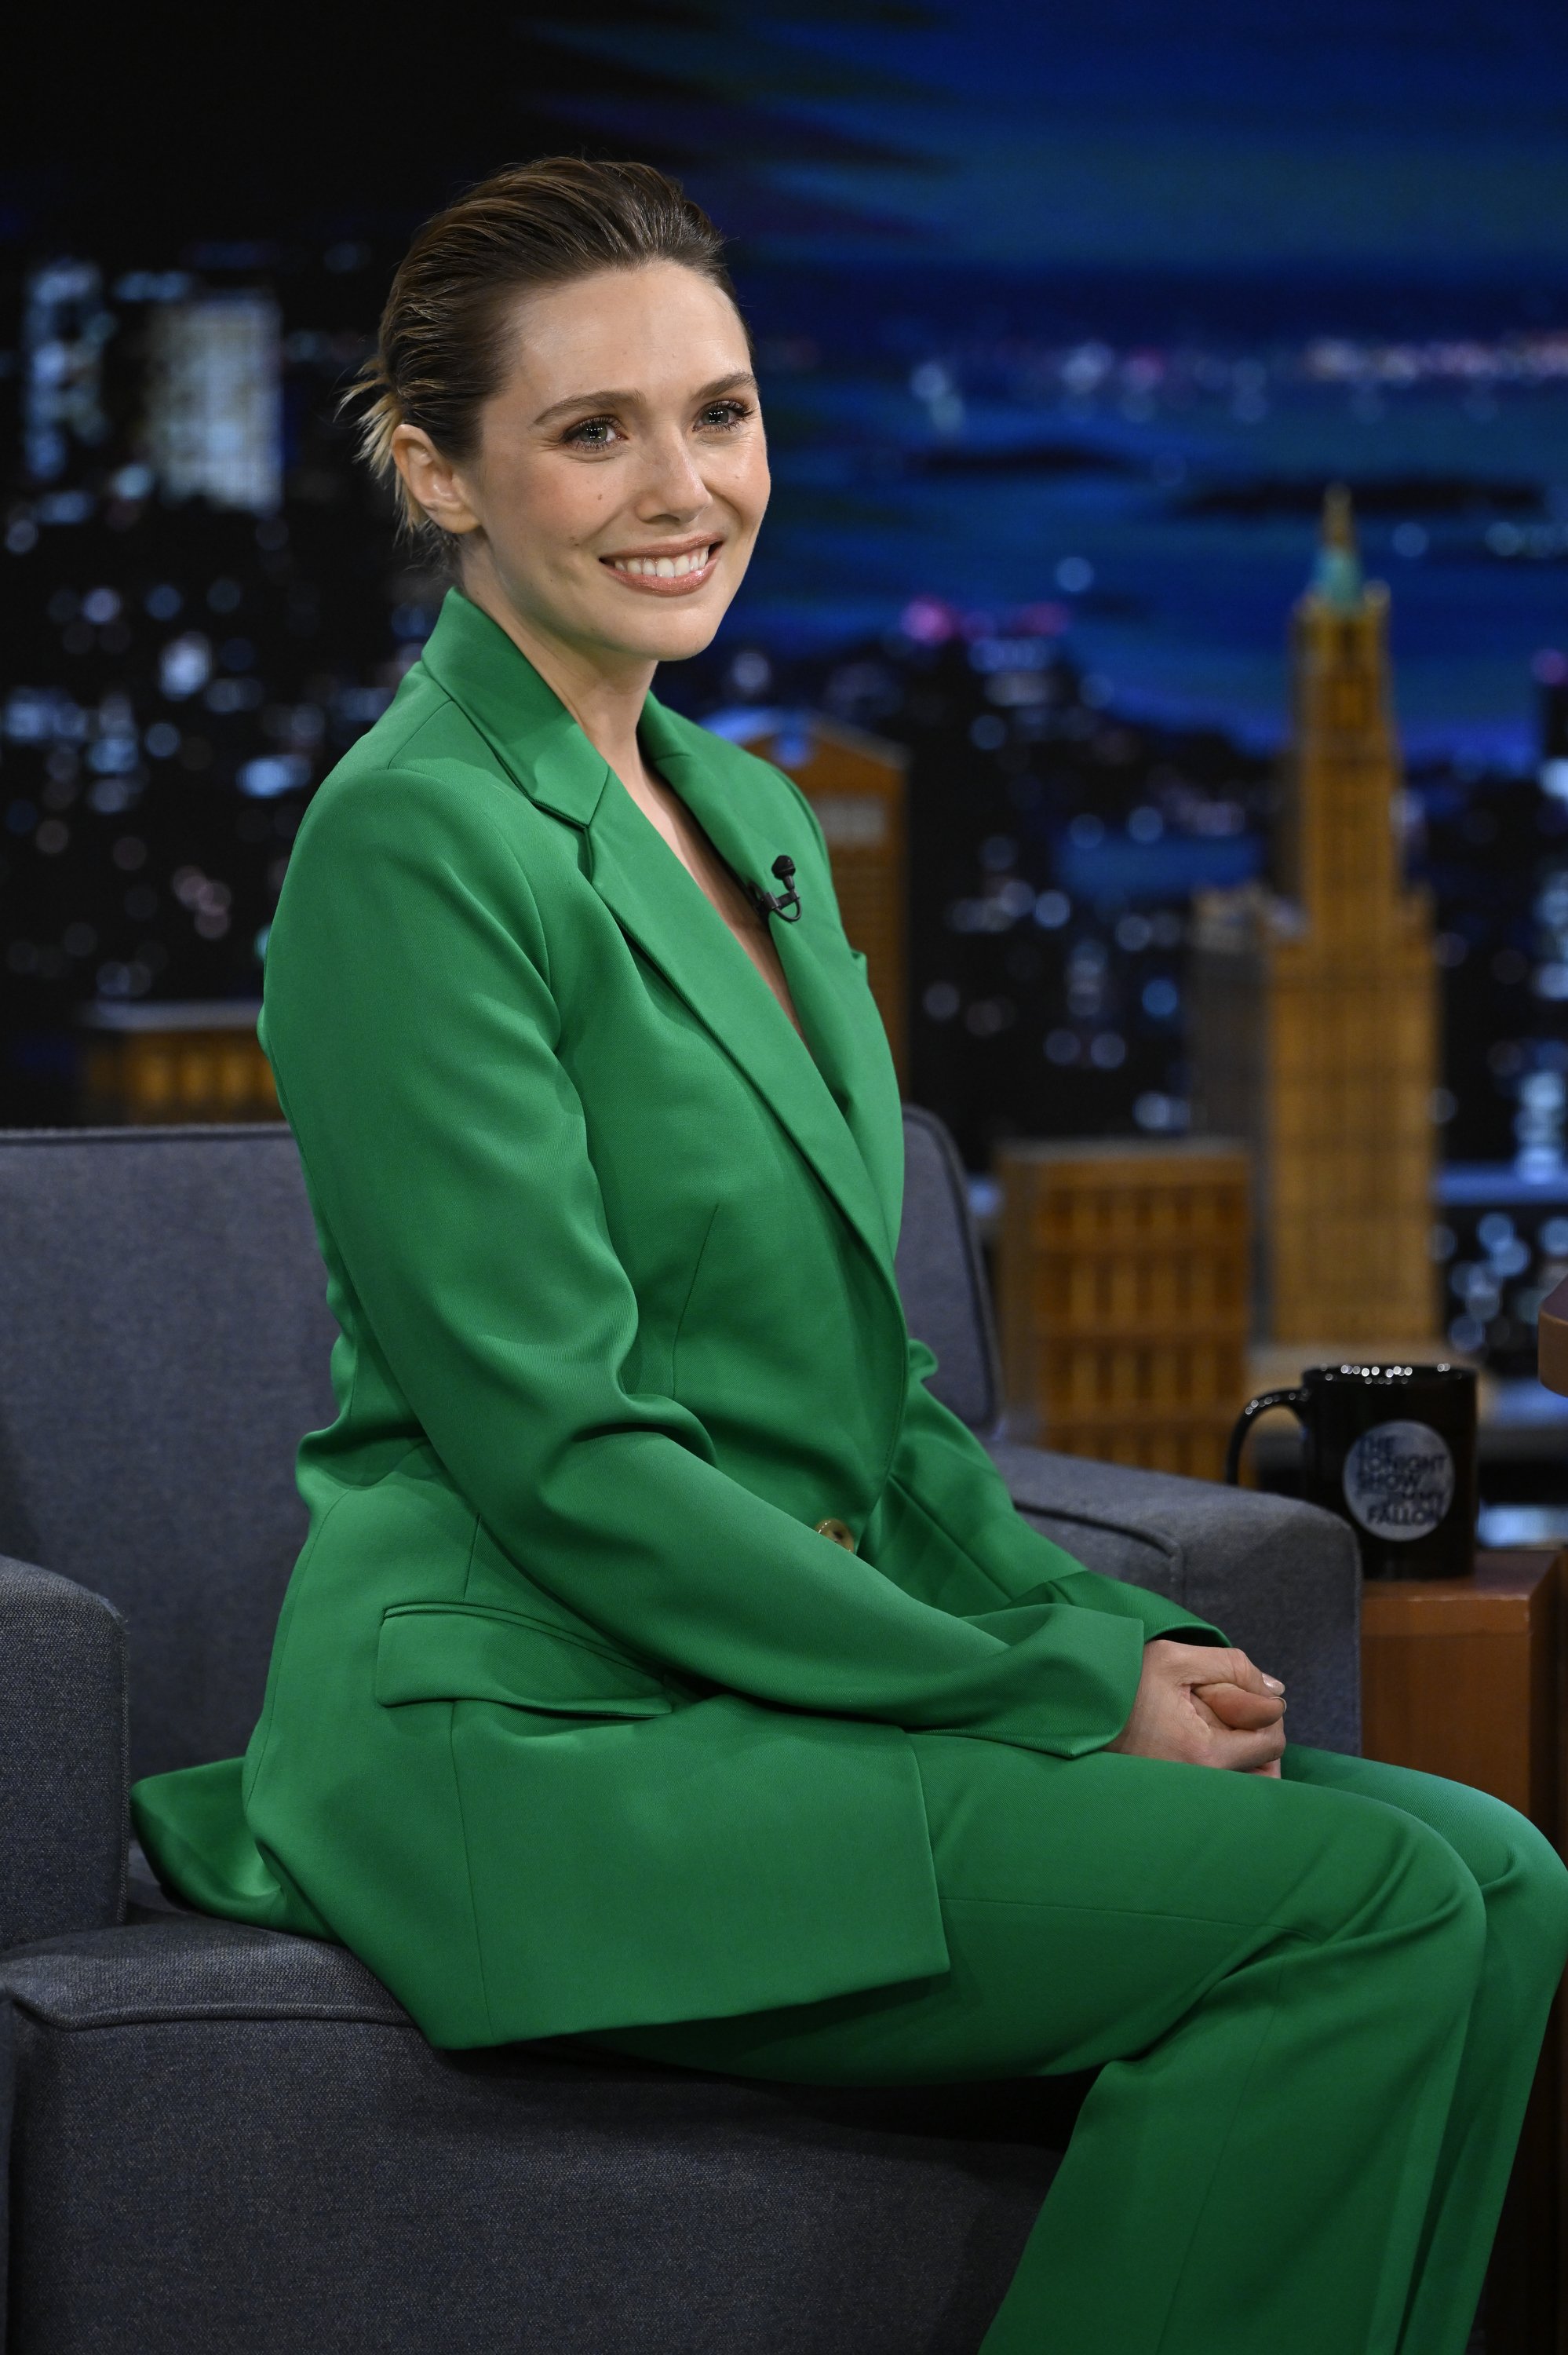 Actress Elizabeth Olsen during an interview on Wednesday, May 4, 2022. | Source: Getty Images